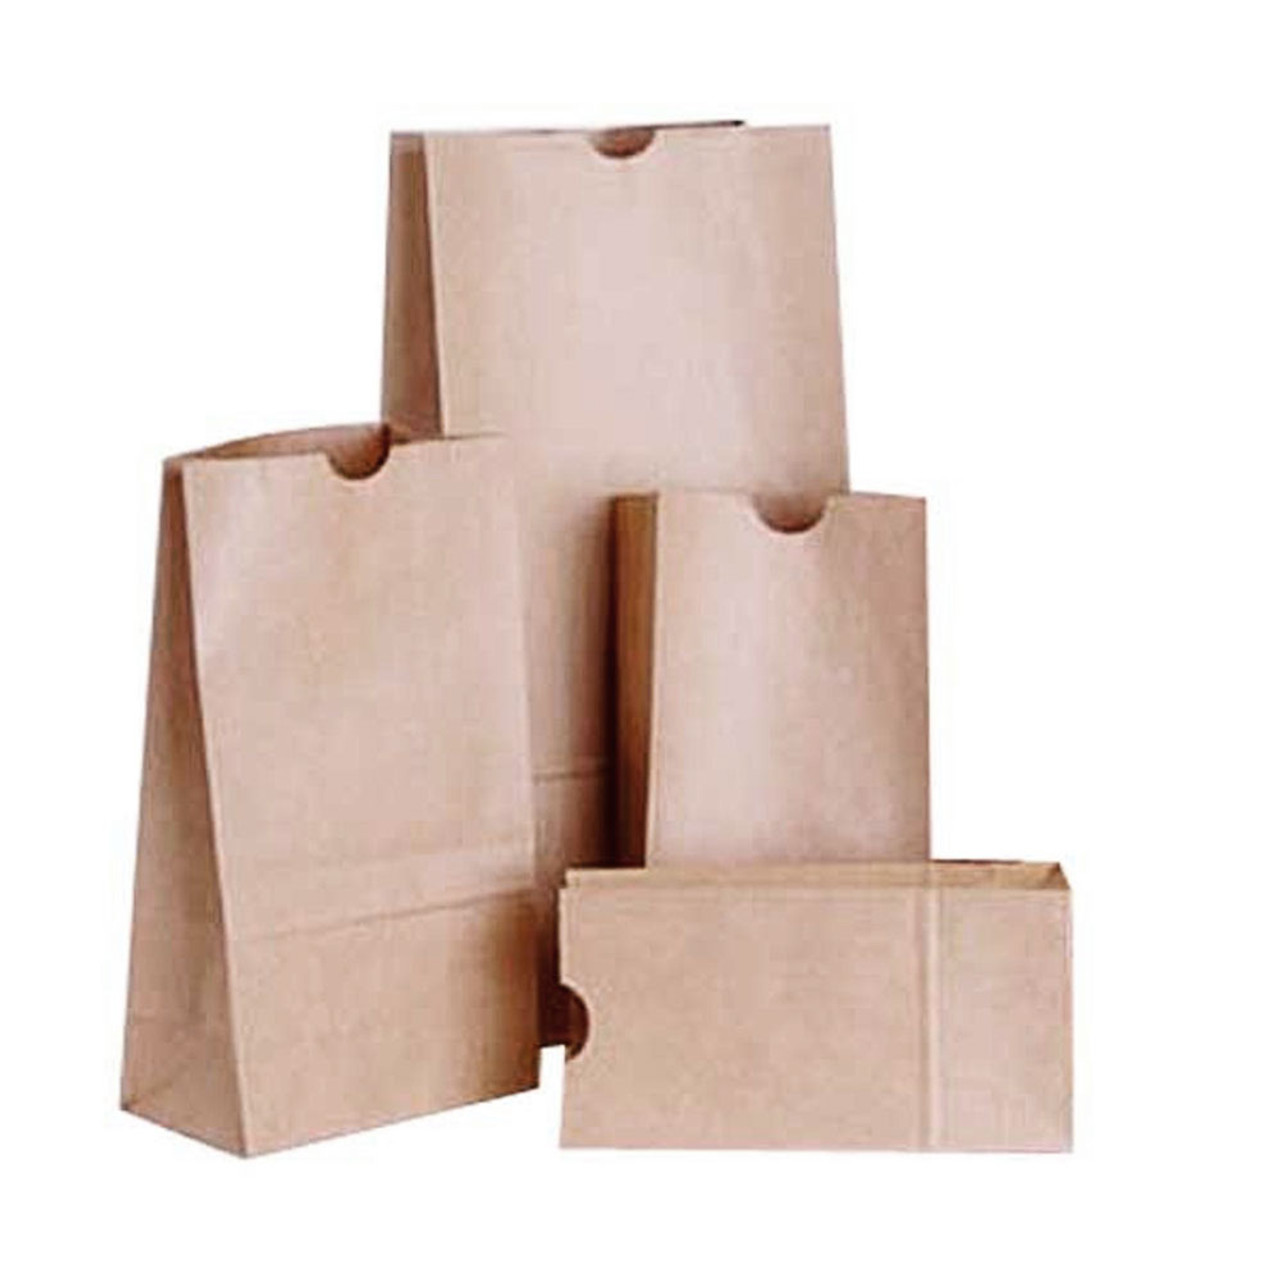 Hardware Style Paper Bags - 4-3/4" x 2-15/16" x 8-9/16" per 500